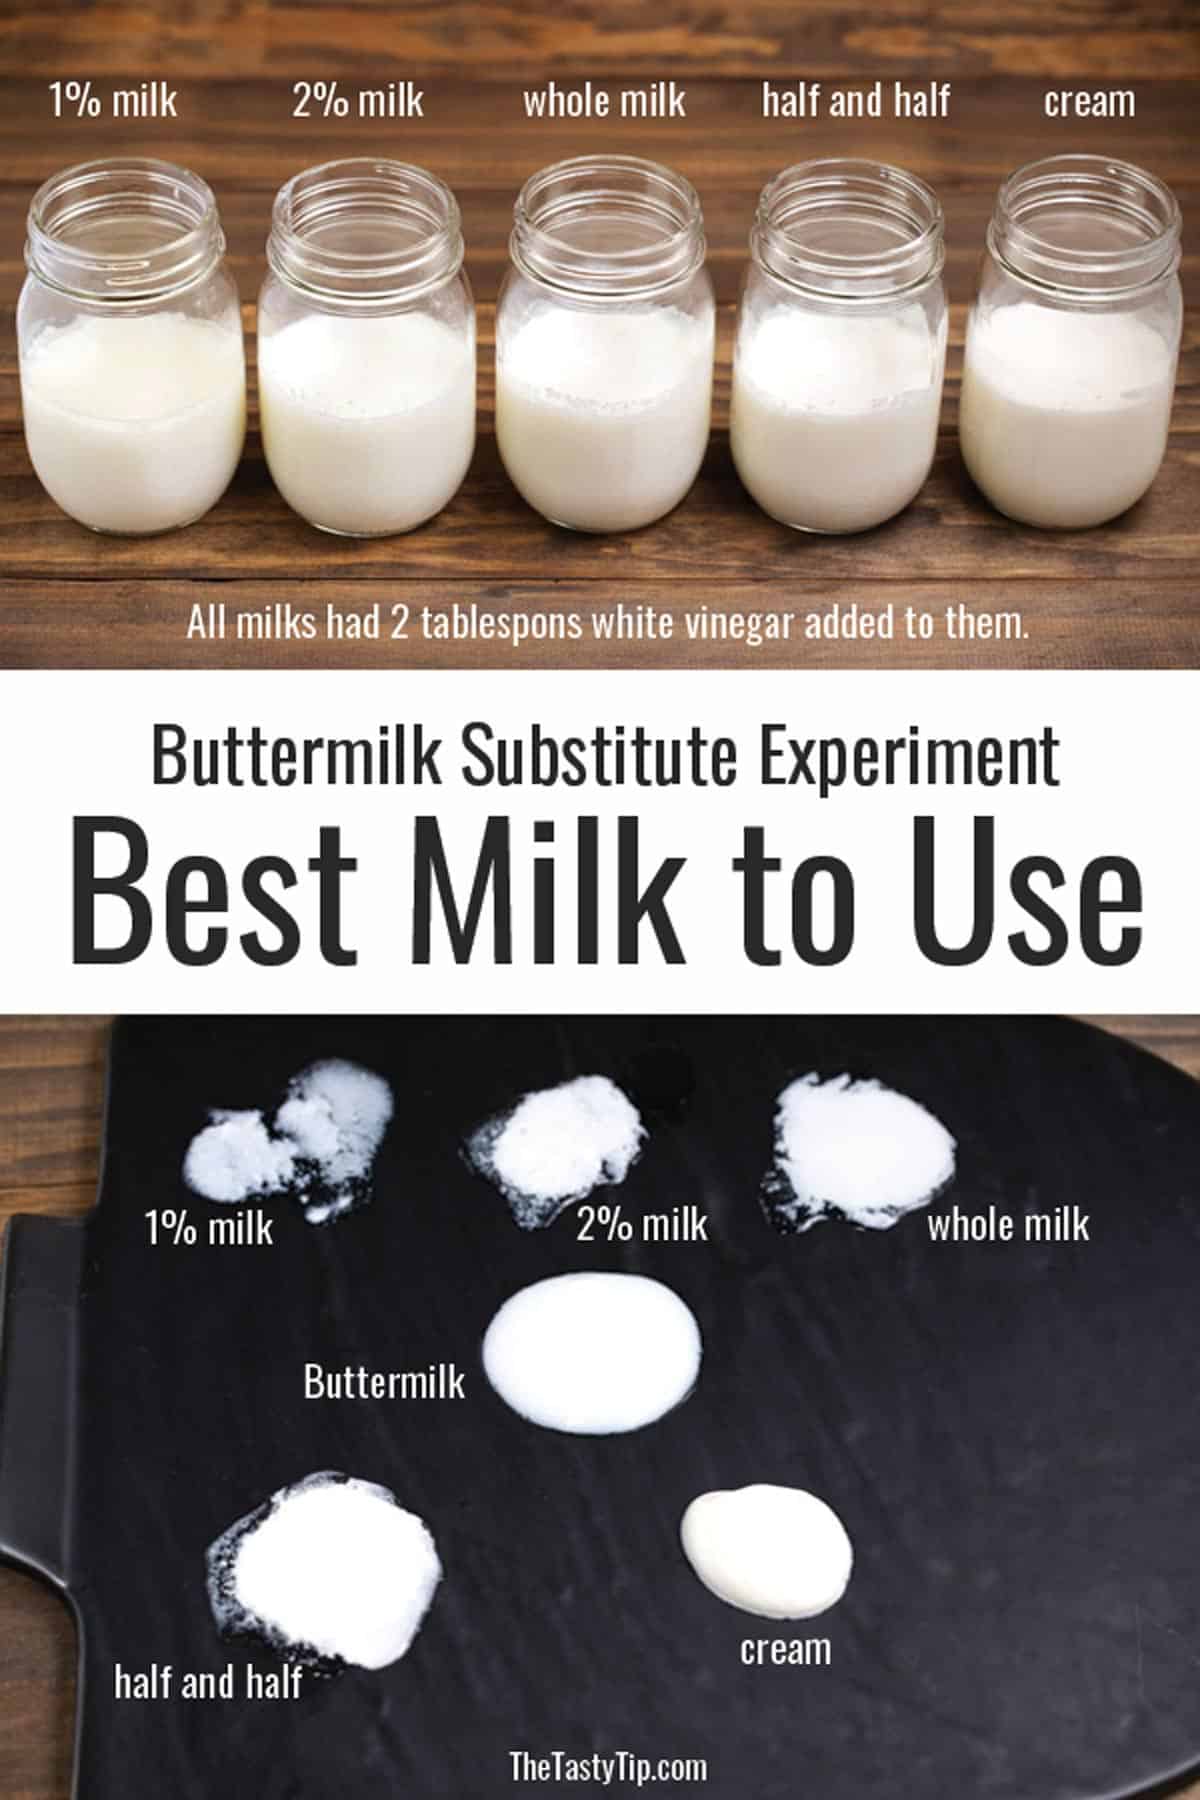 Buttermilk samples using various milk products.